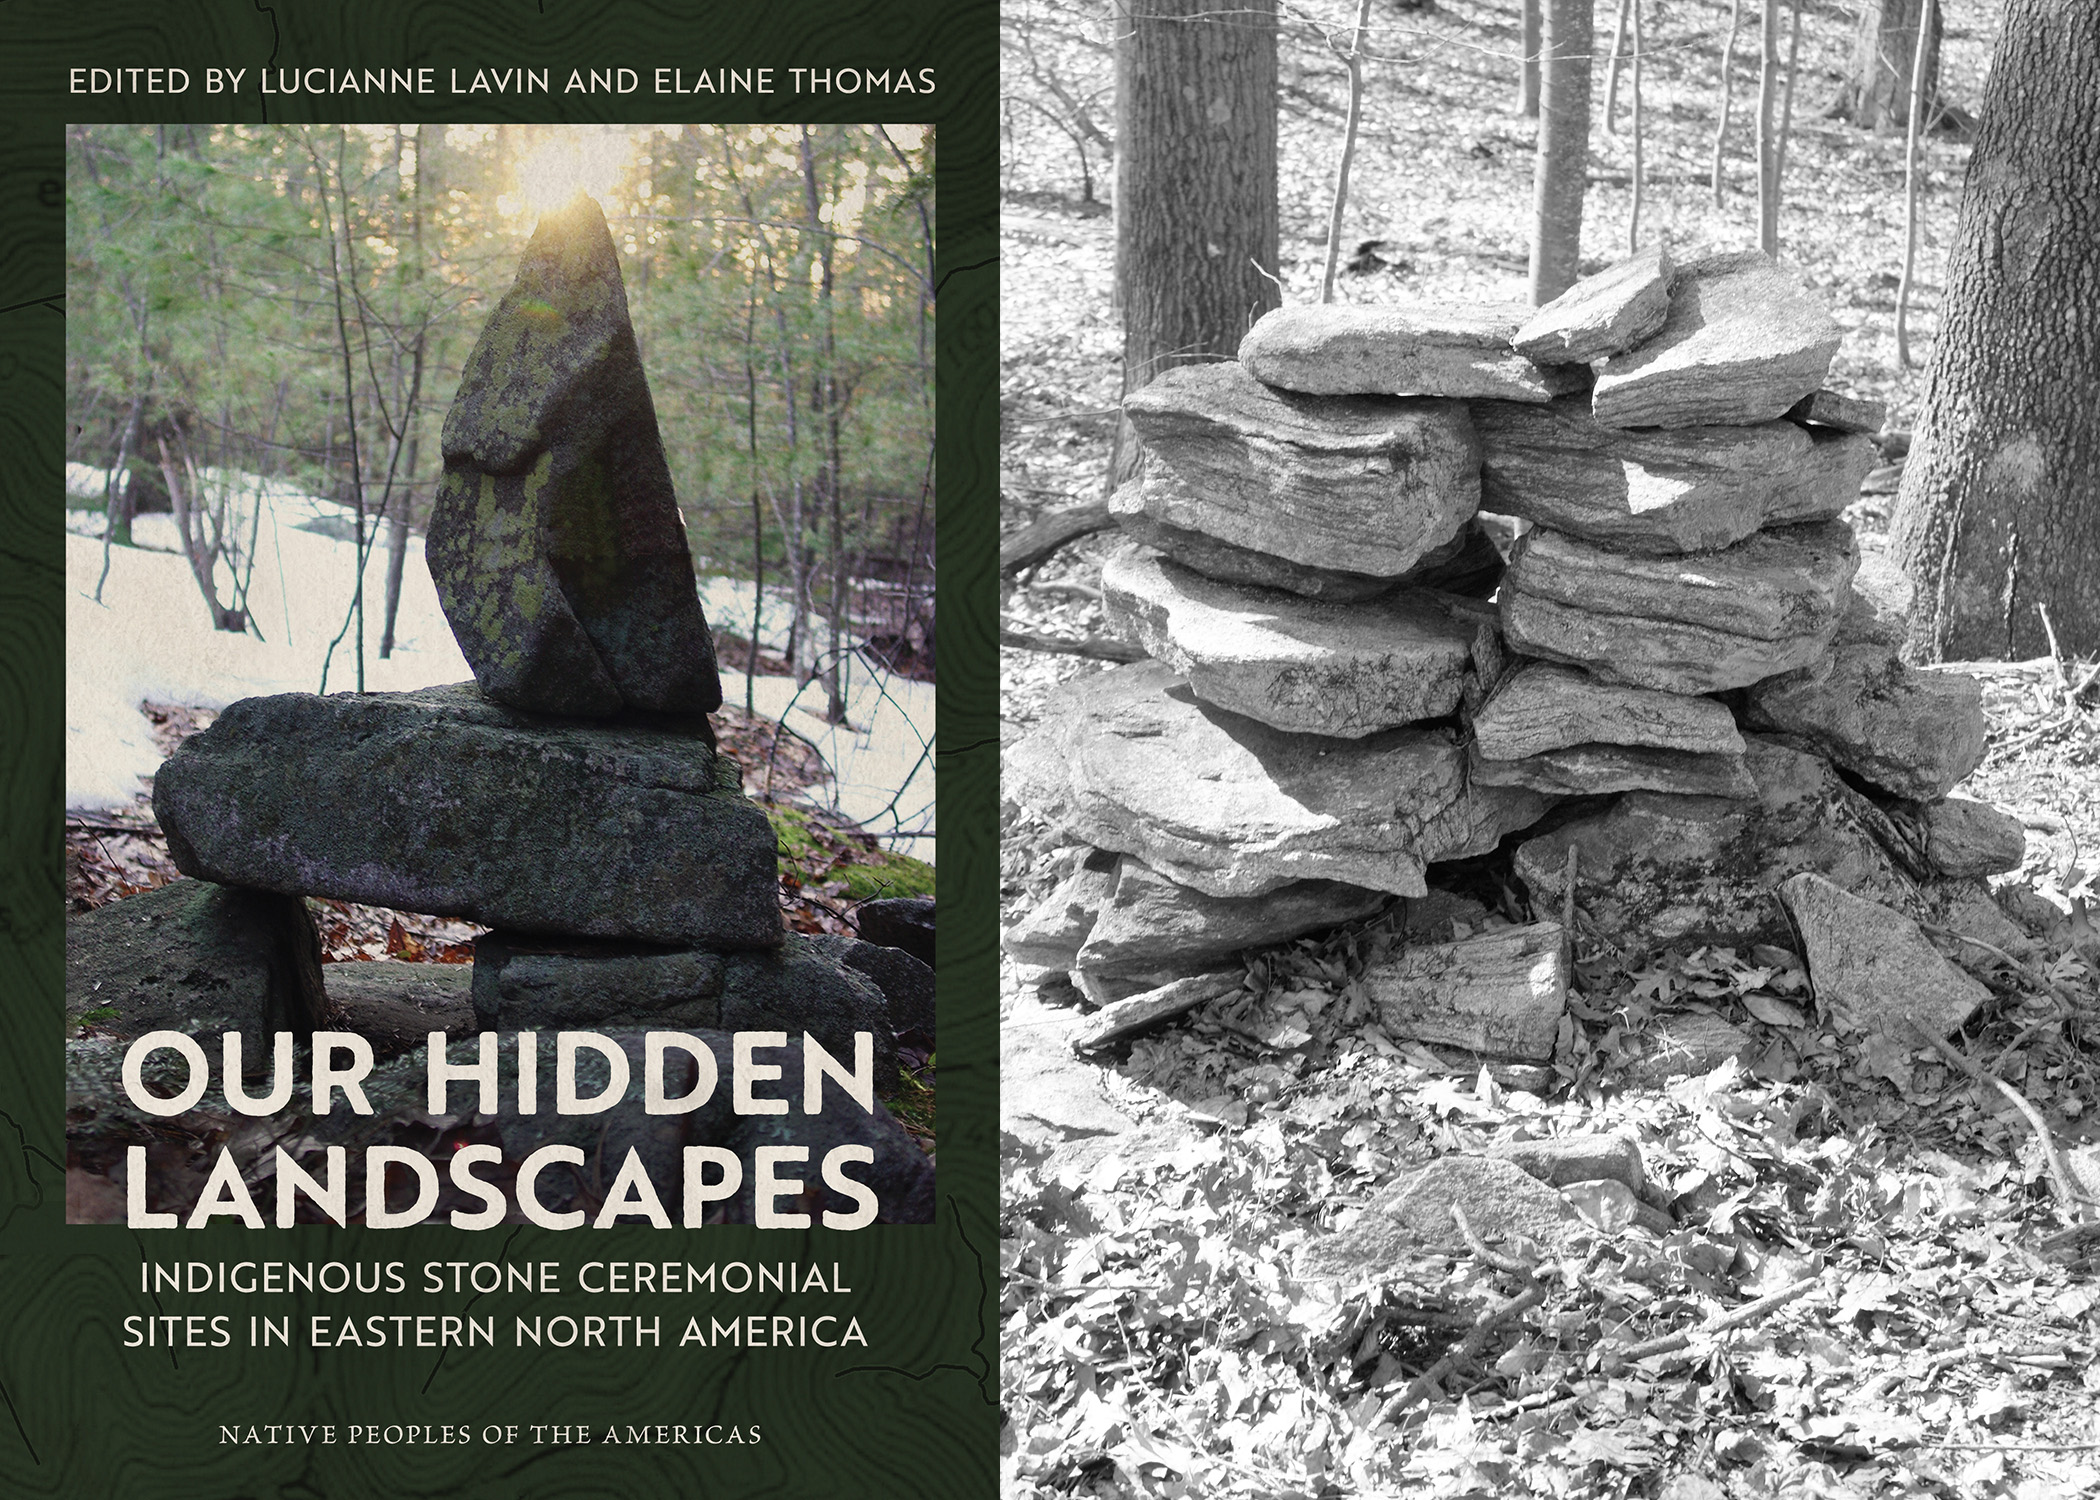 Excerpt from “Our Hidden Landscapes”